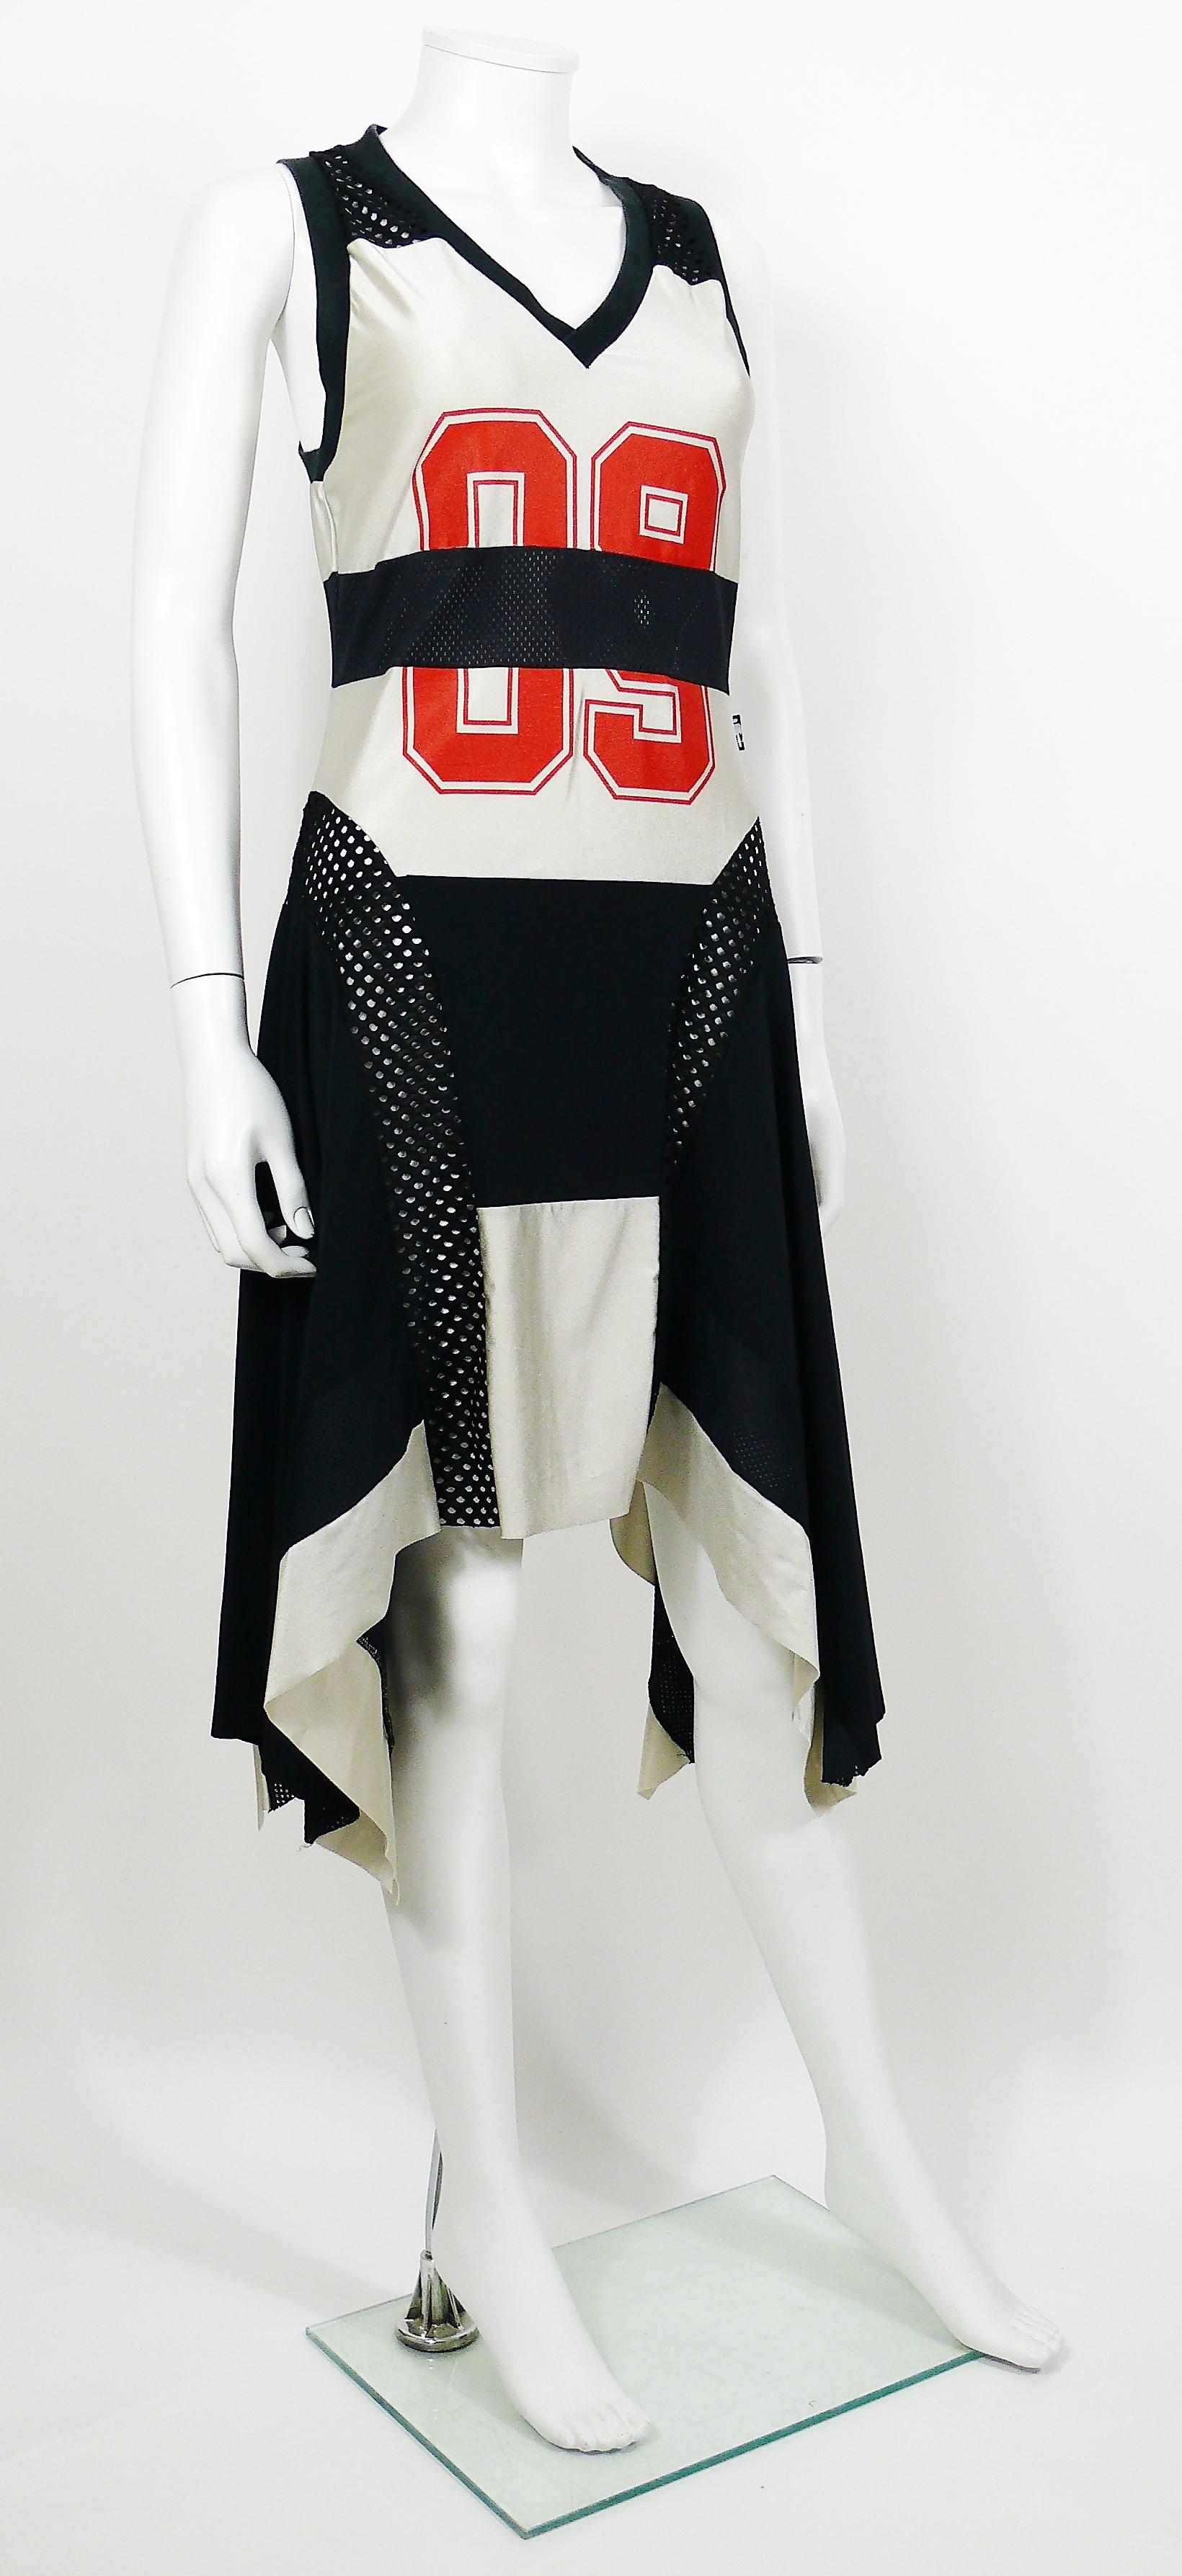 JEAN PAUL GAULTIER black and grey colour block basketball jersey asymetrical dress.

This dress features :
- V-neck.
- Racer back.
- Openwork mesh paneling to the front and rear.
- Large red 09 print to the front.

Label reads JPG JEAN'S COLLECTION